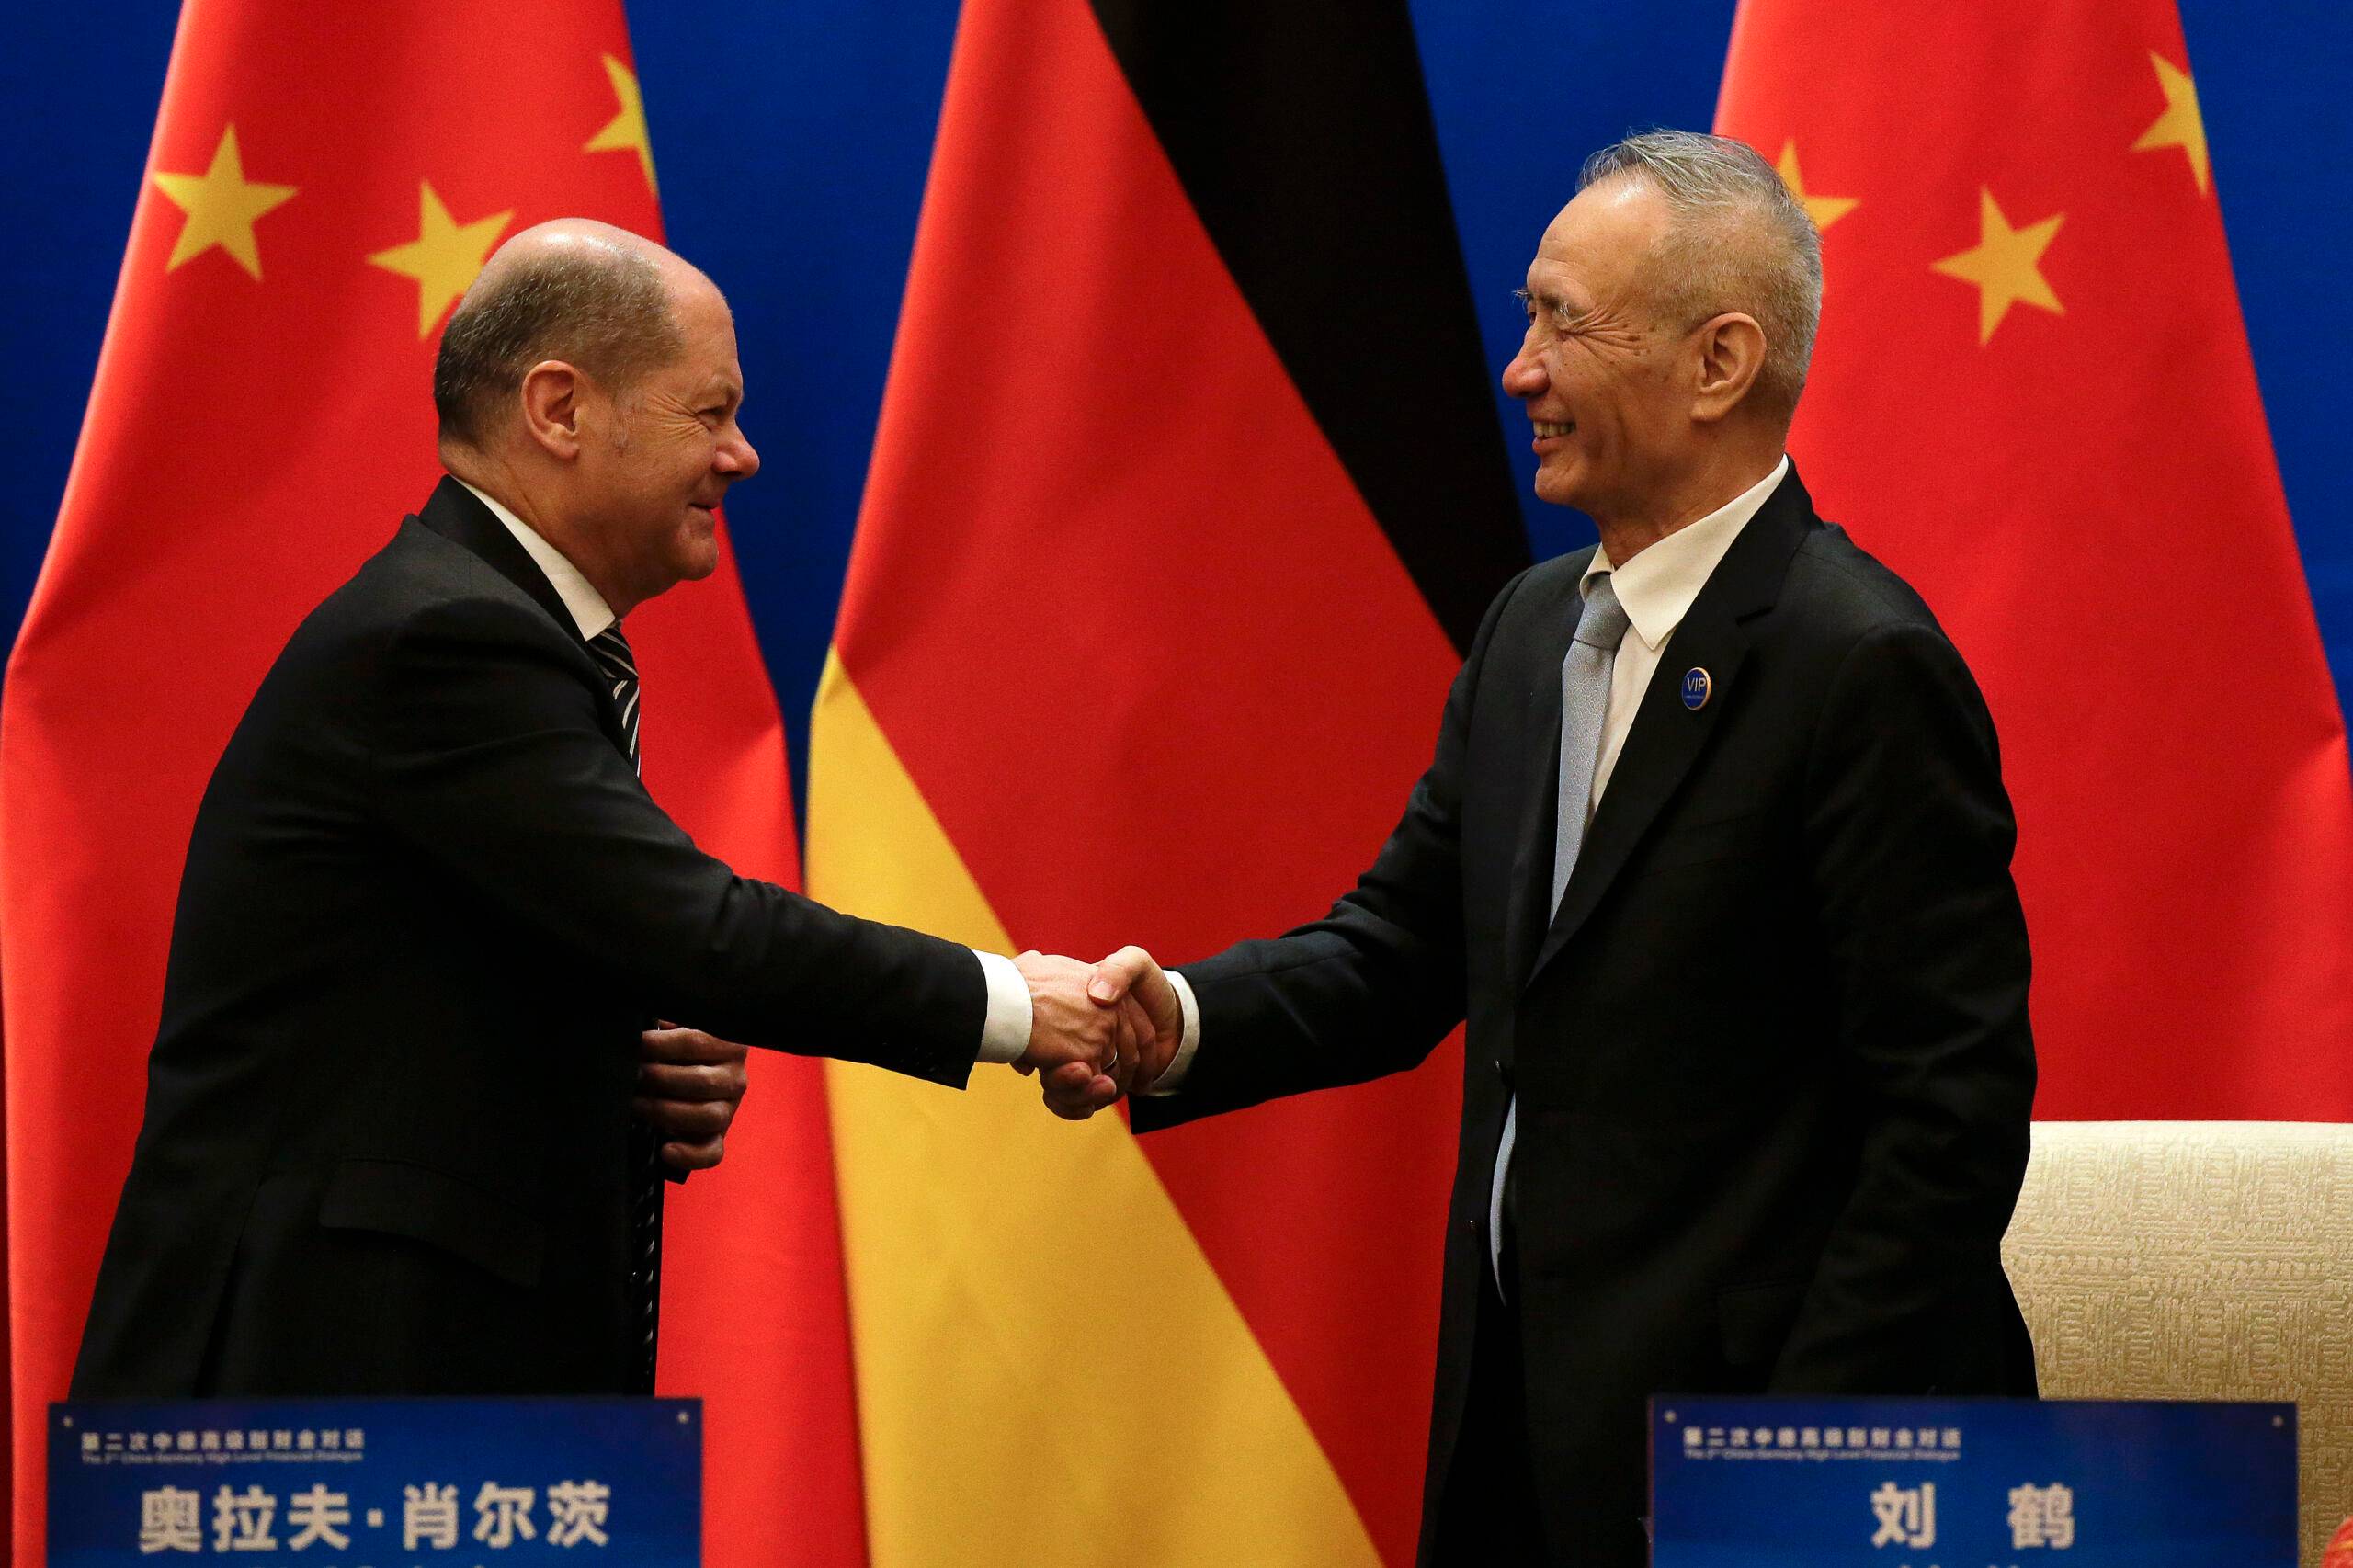 Germany's Finance Minister Olaf Scholz (L) shakes hands with China's Vice Premier Liu He after witnessing a signing ceremony after the China-Germany High Level Financial Dialogue at the Diaoyutai State Guesthouse in Beijing on January 18, 2019. (Photo by Andy Wong / POOL / AFP)